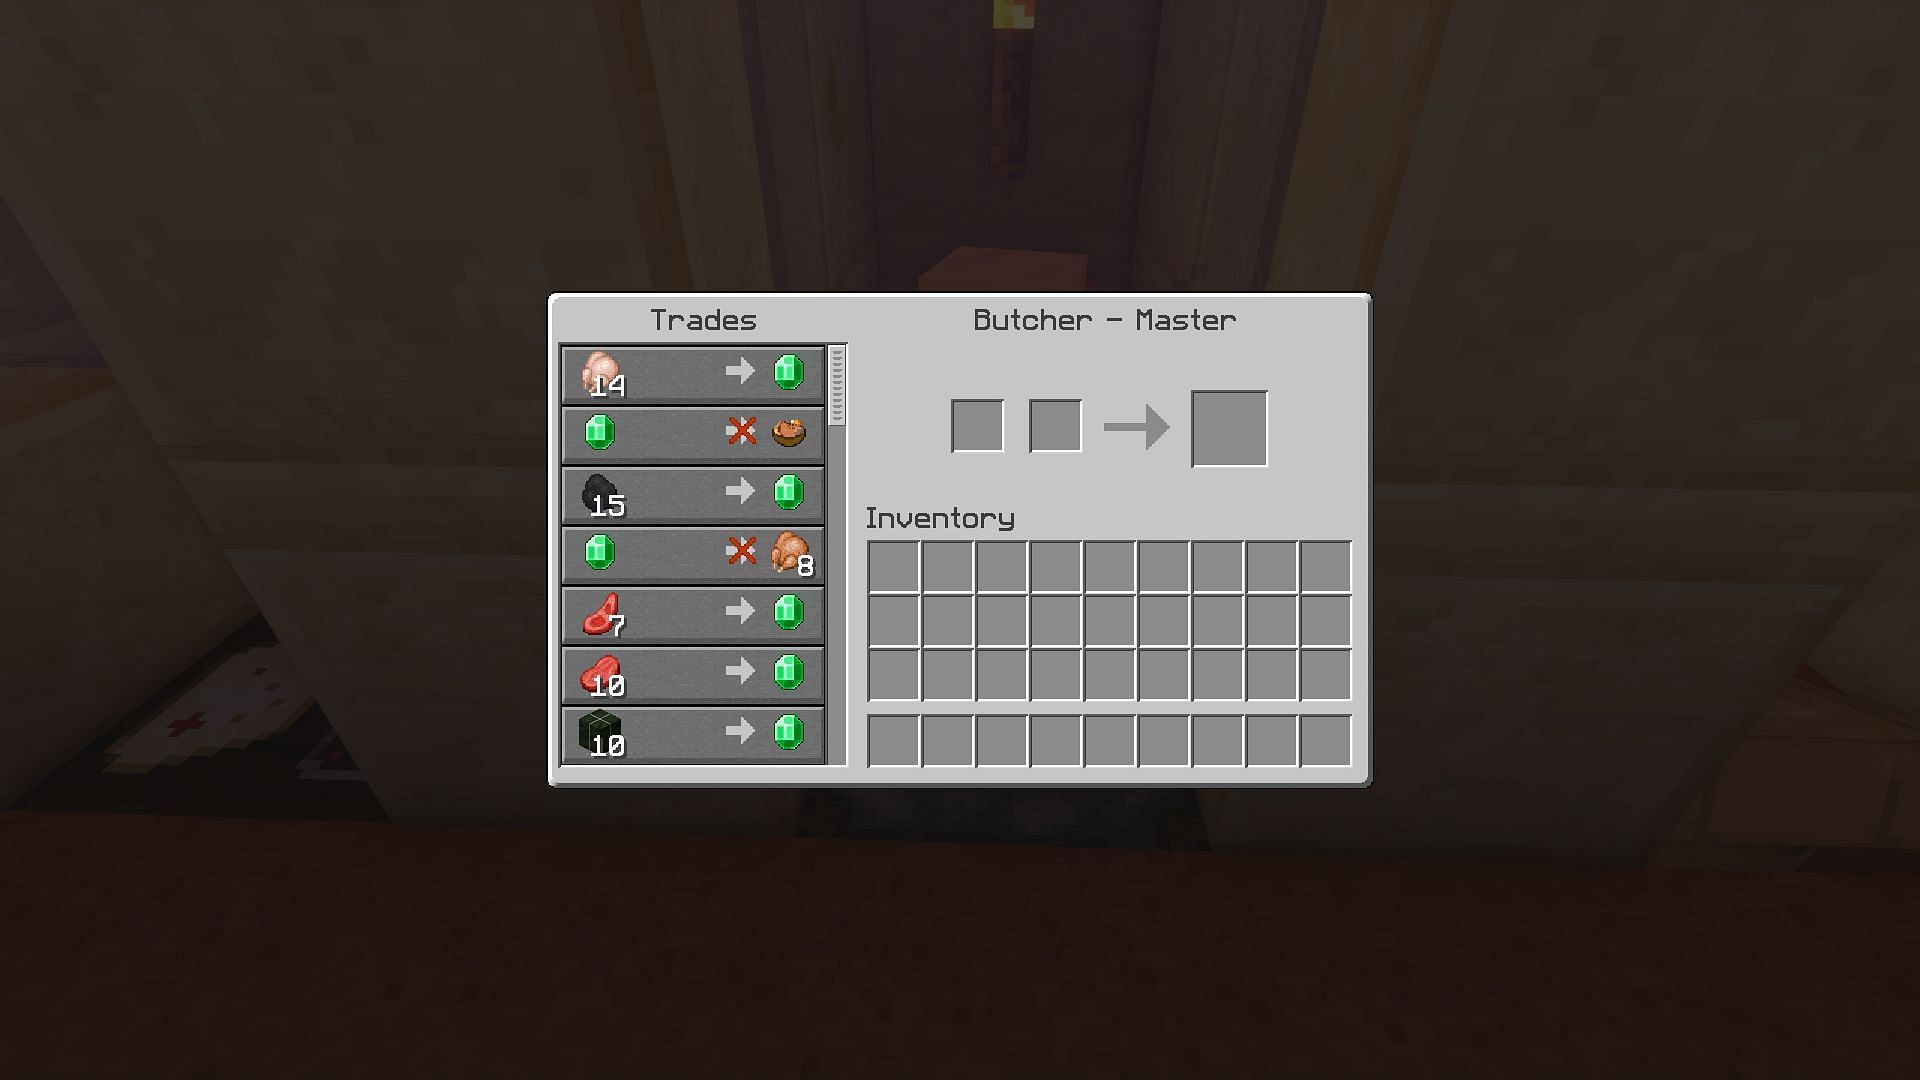 The trades offered by a butcher (Image via Minecraft)